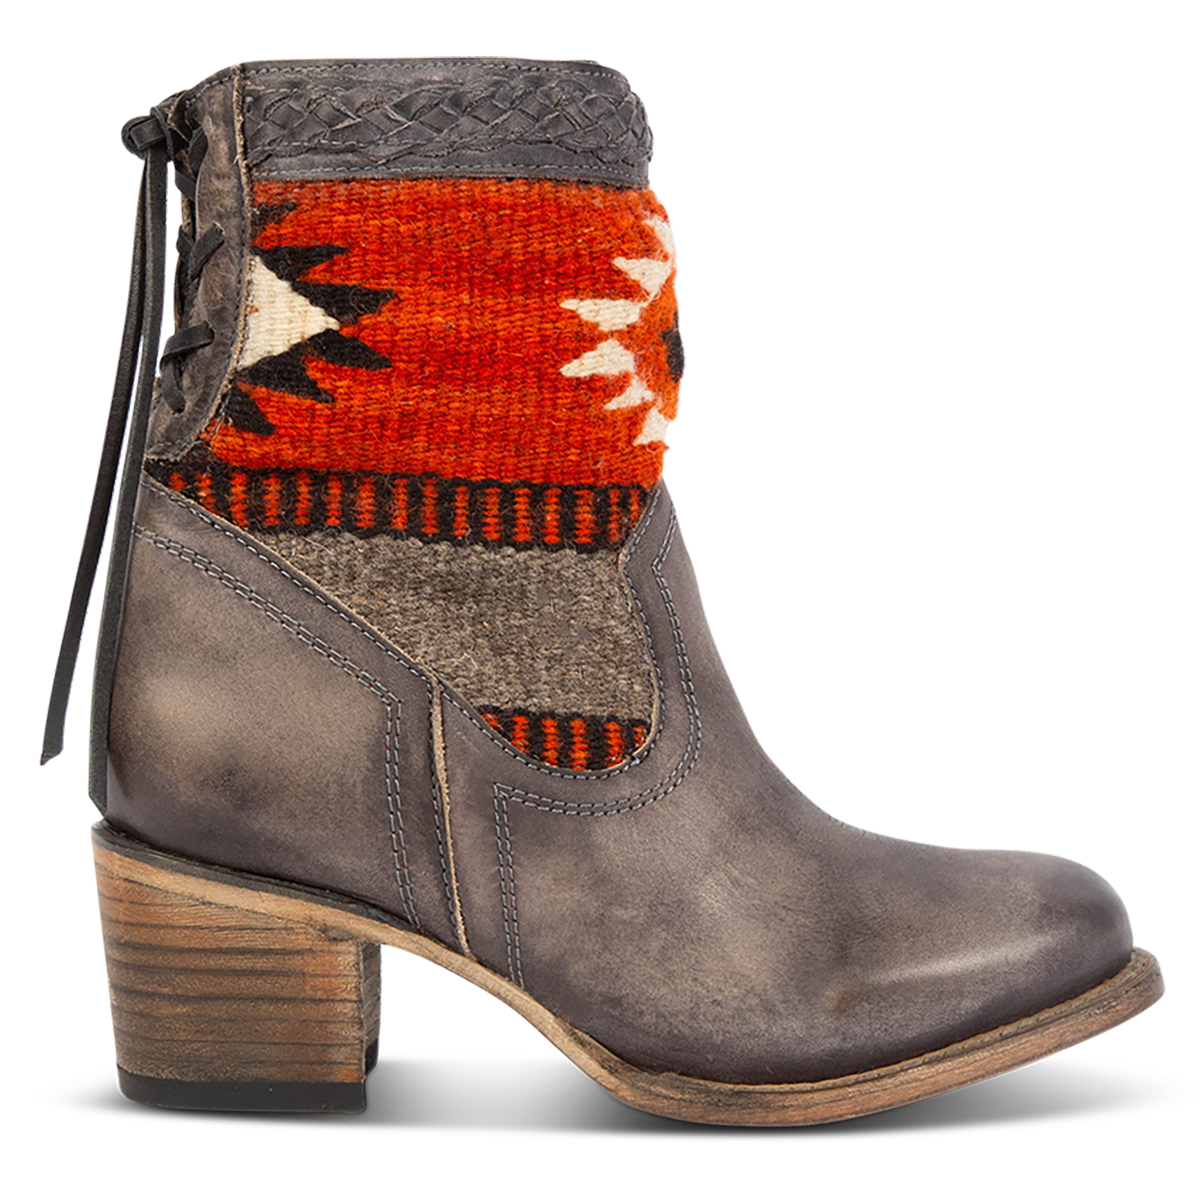 FREEBIRD women's Songbird stone leather bootie with woven detailing, leather tie lacing and an inside working brass zip closure